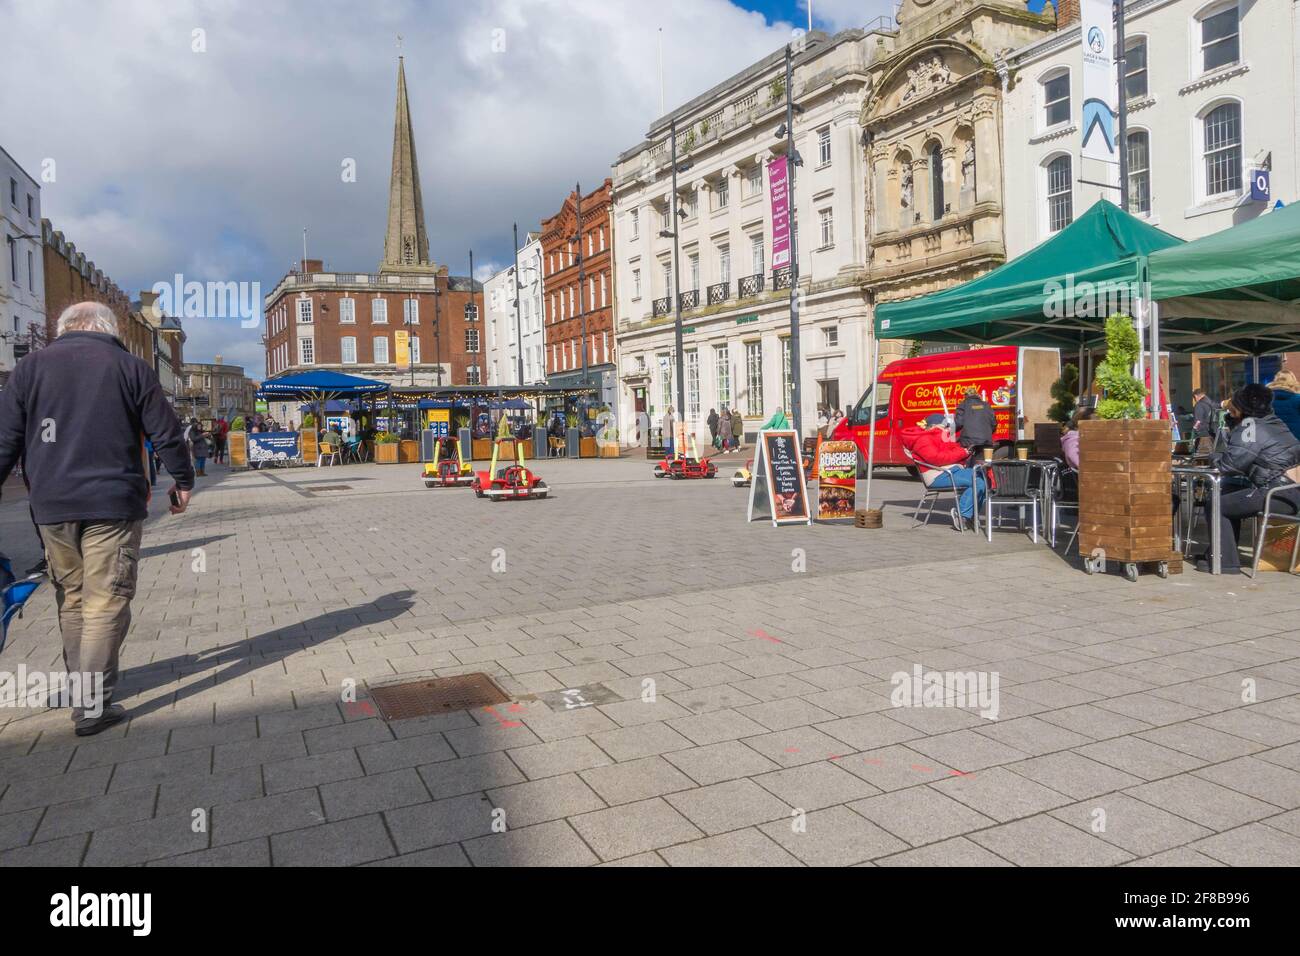 On the day that covid 19 restrictions are eased the public are getting back to normality, Hereford UK. April 2021, Stock Photo